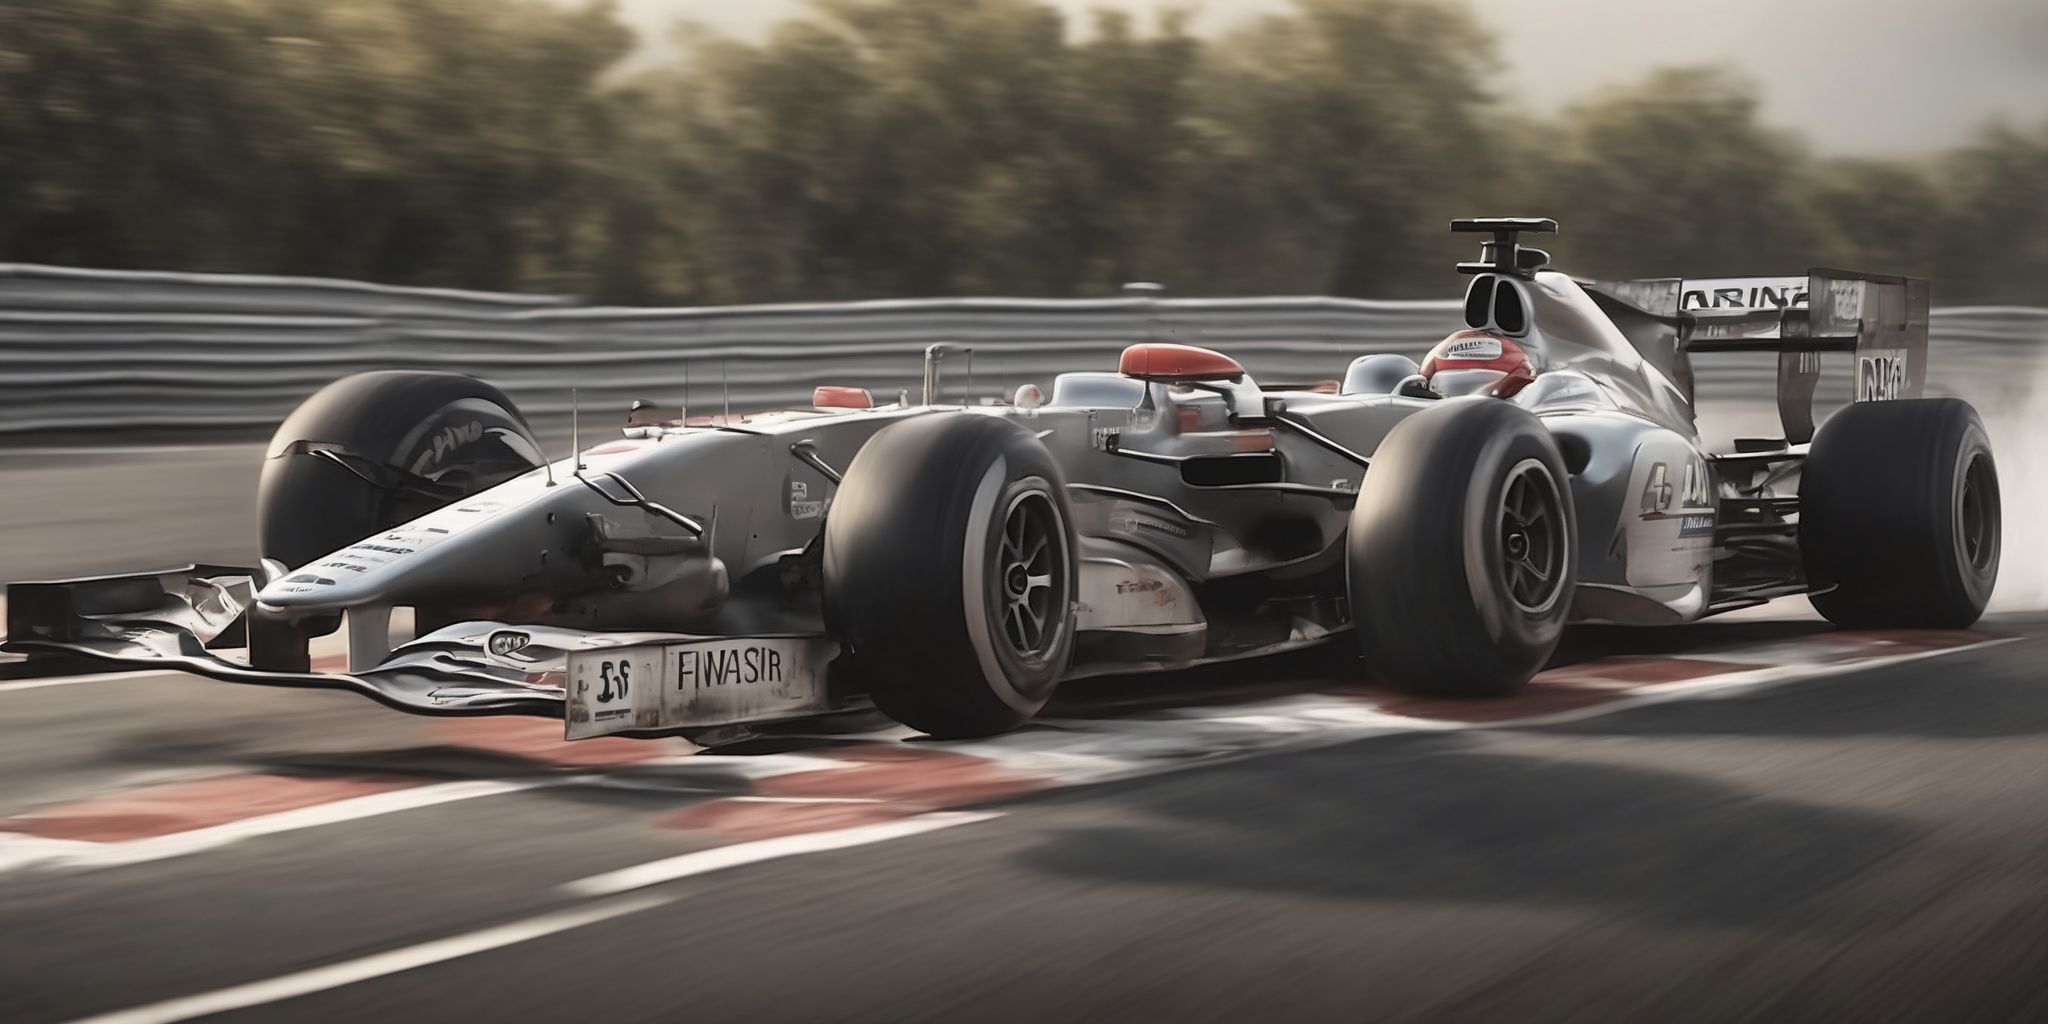 Winning formula  in realistic, photographic style